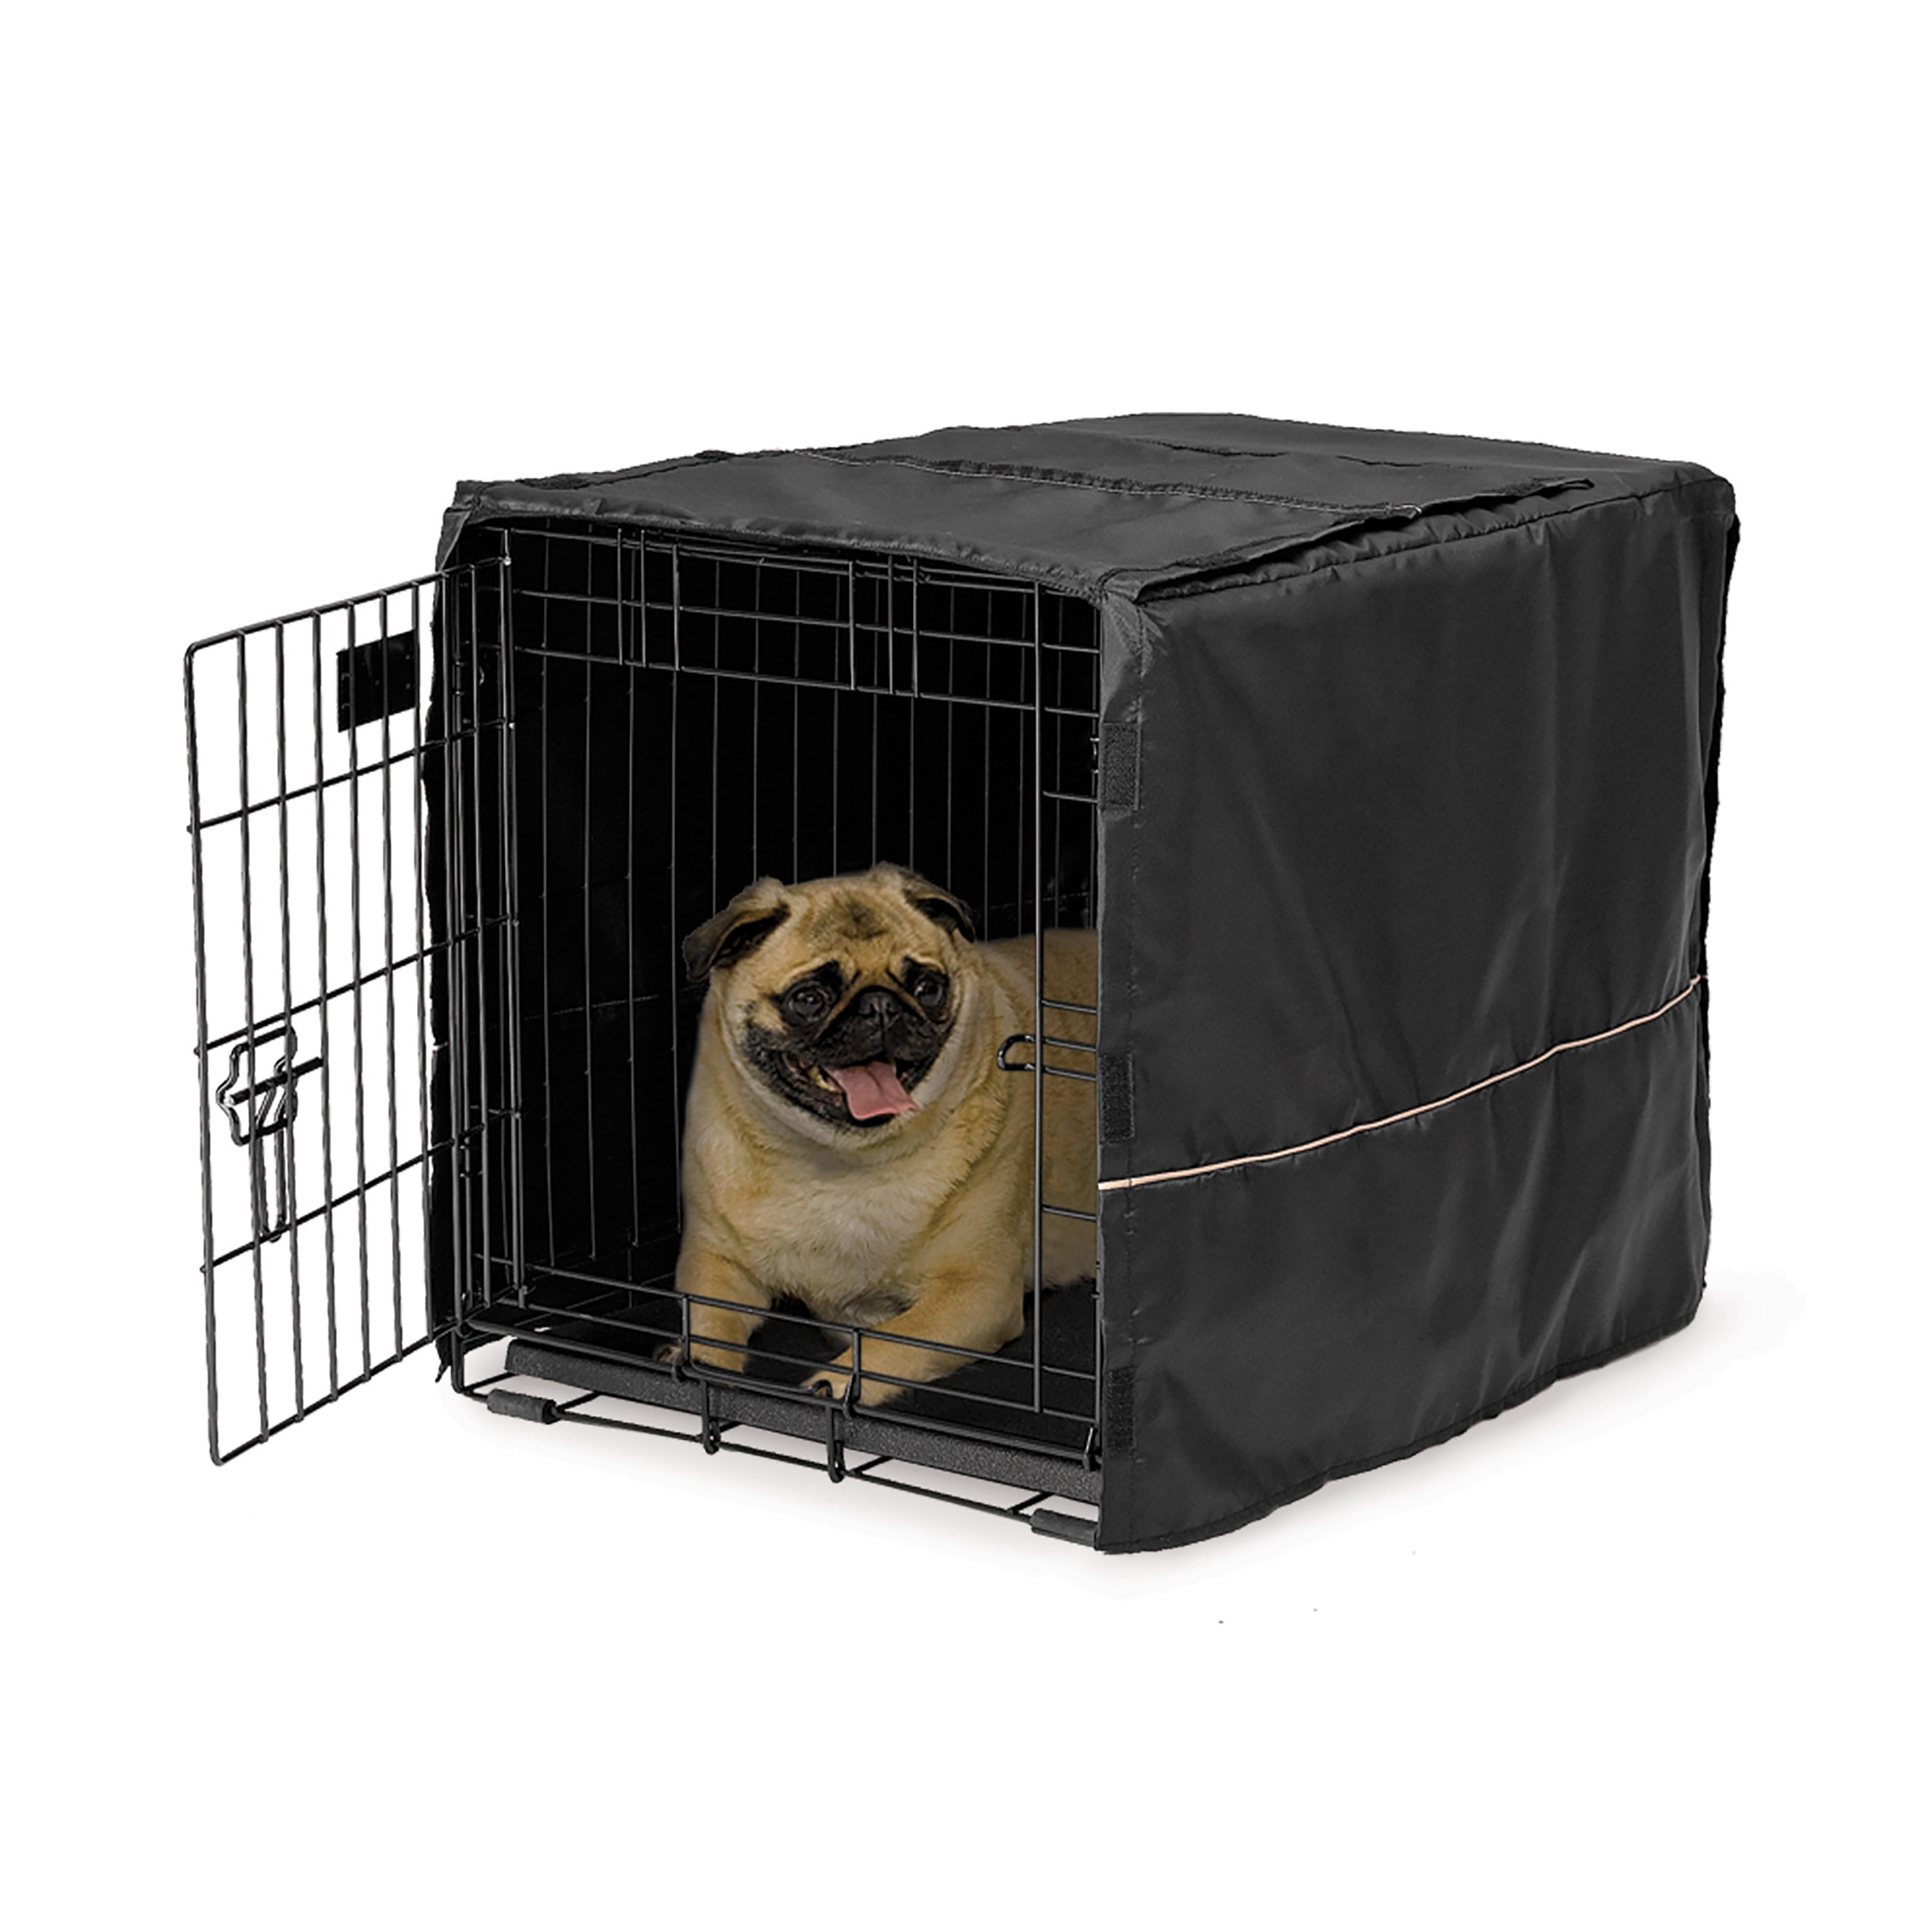 X-ZONE PET Double Door Dog Crate Cover Fits 24 30 36 42 48 inches Wire Crate Polyester Pet Kennel Cover 